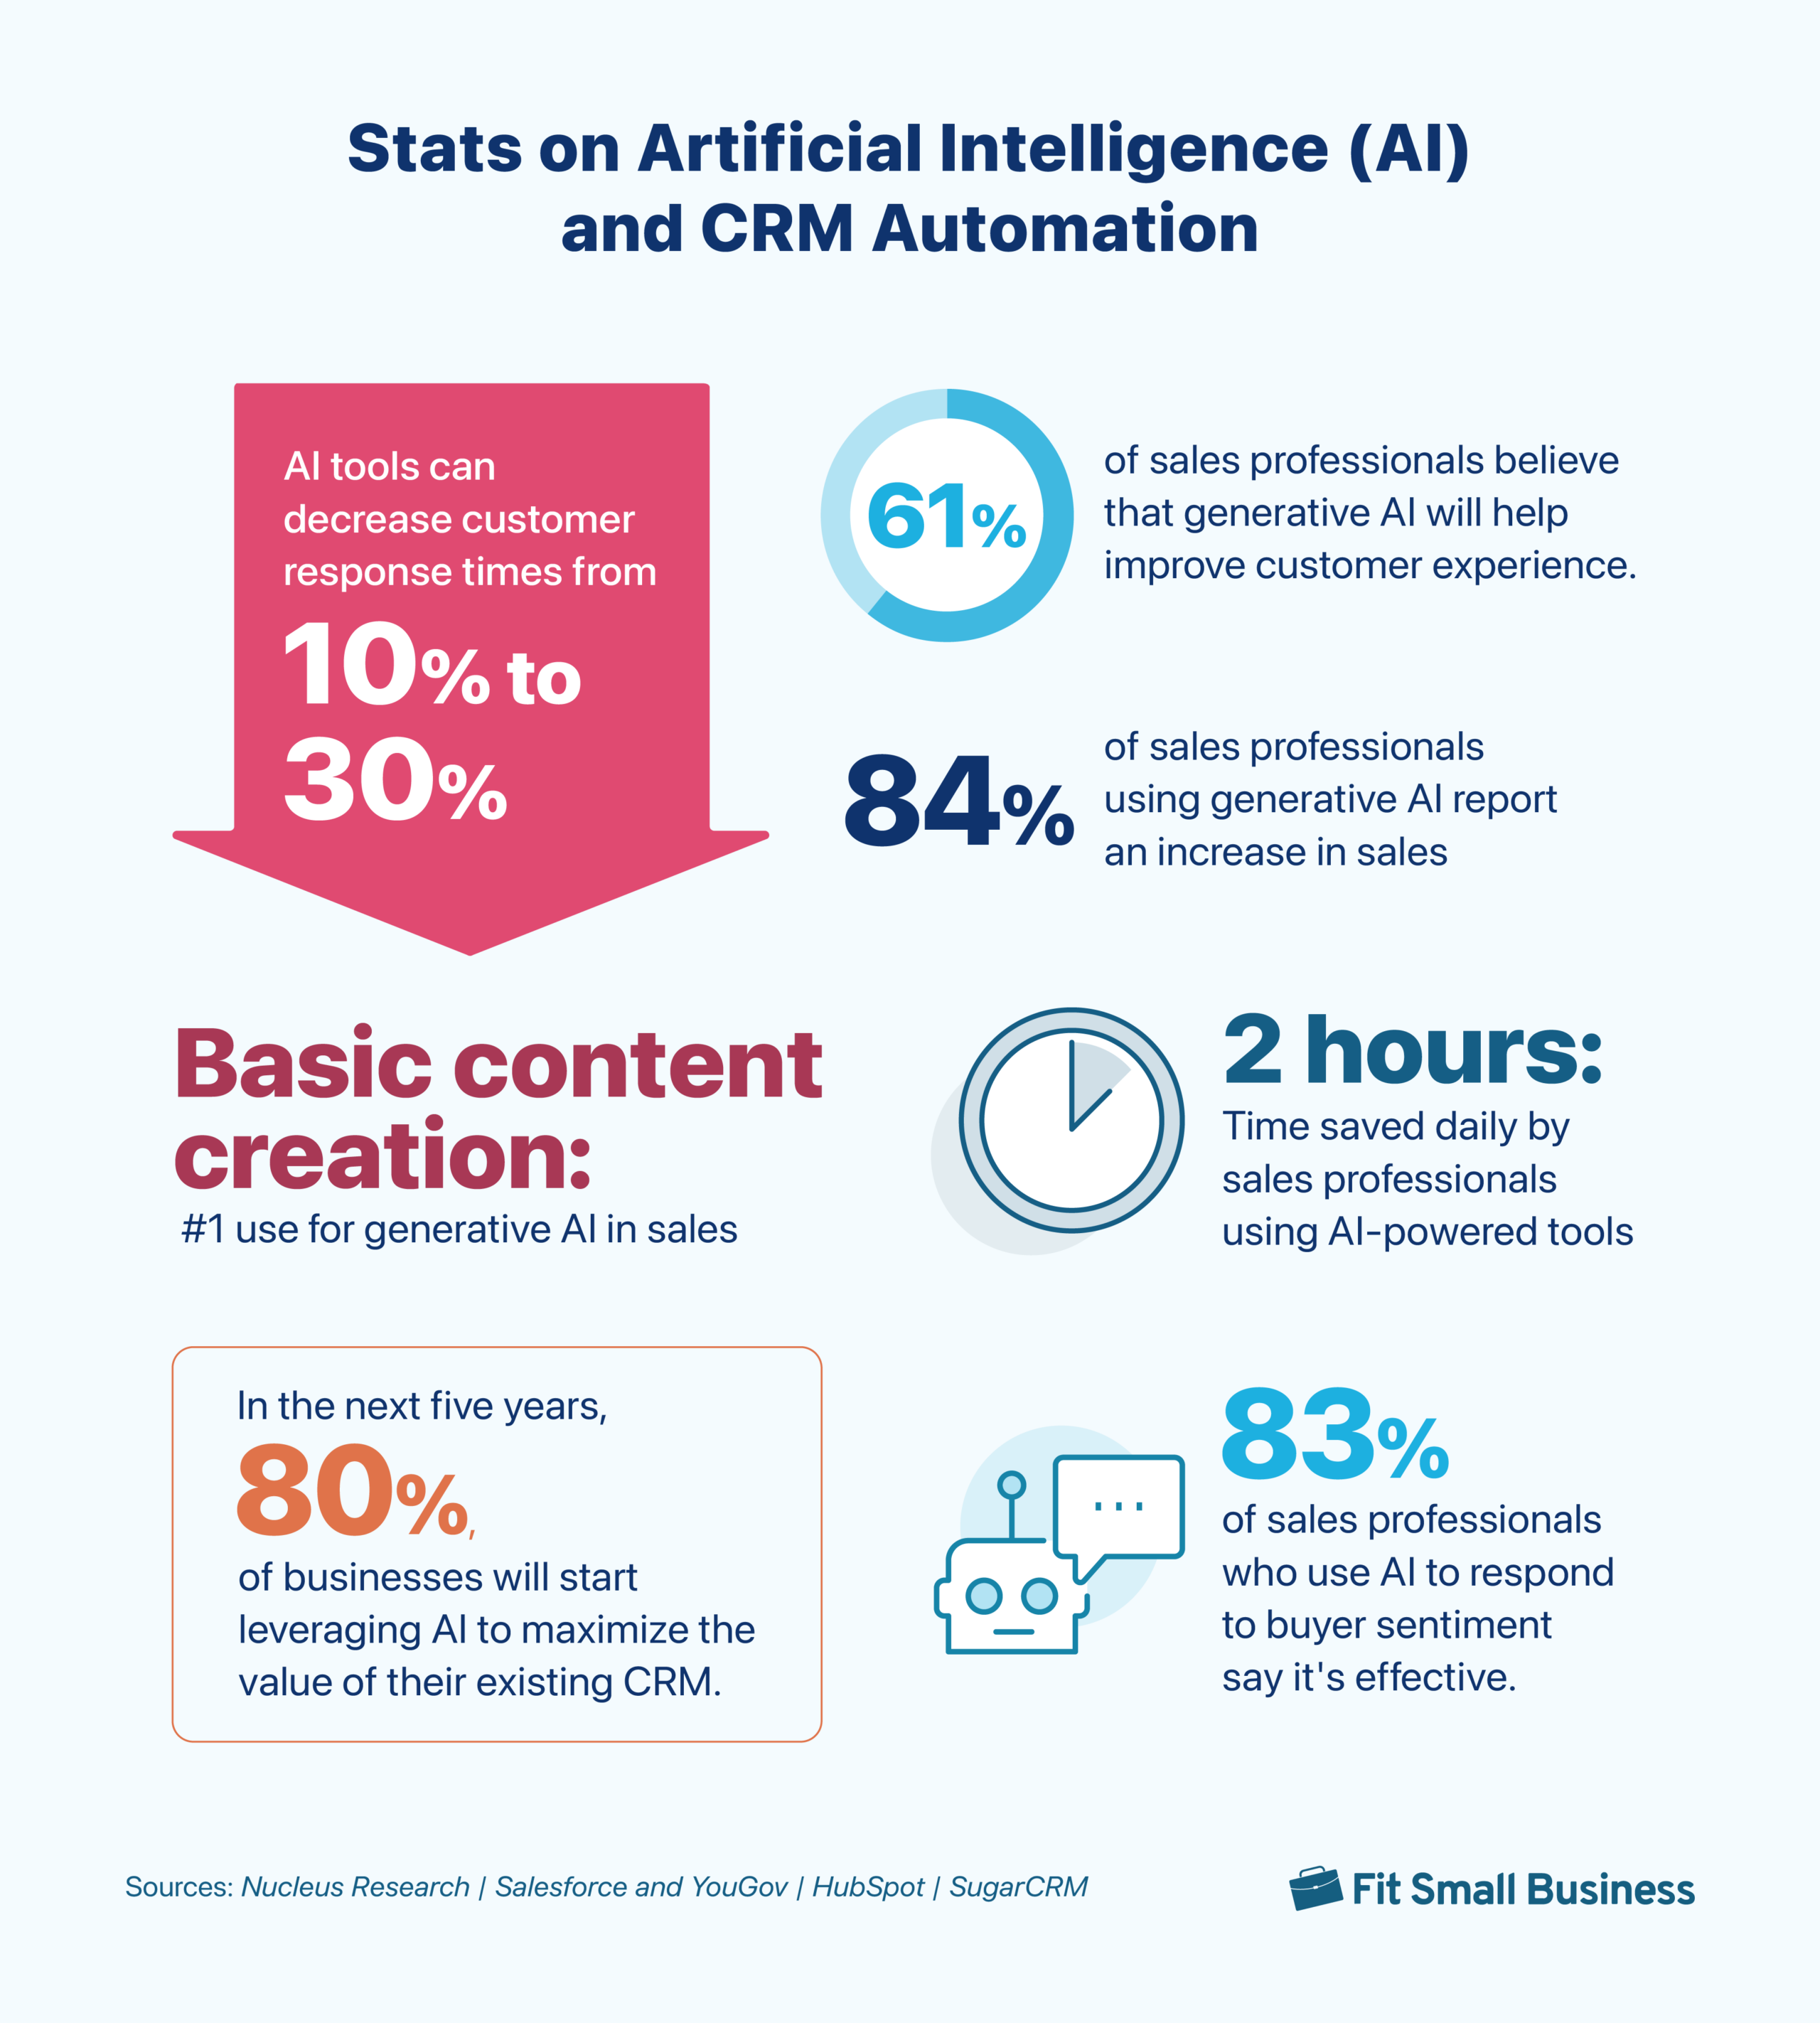 An infographic containing several  statistics on artificial intelligence and CRM automation.